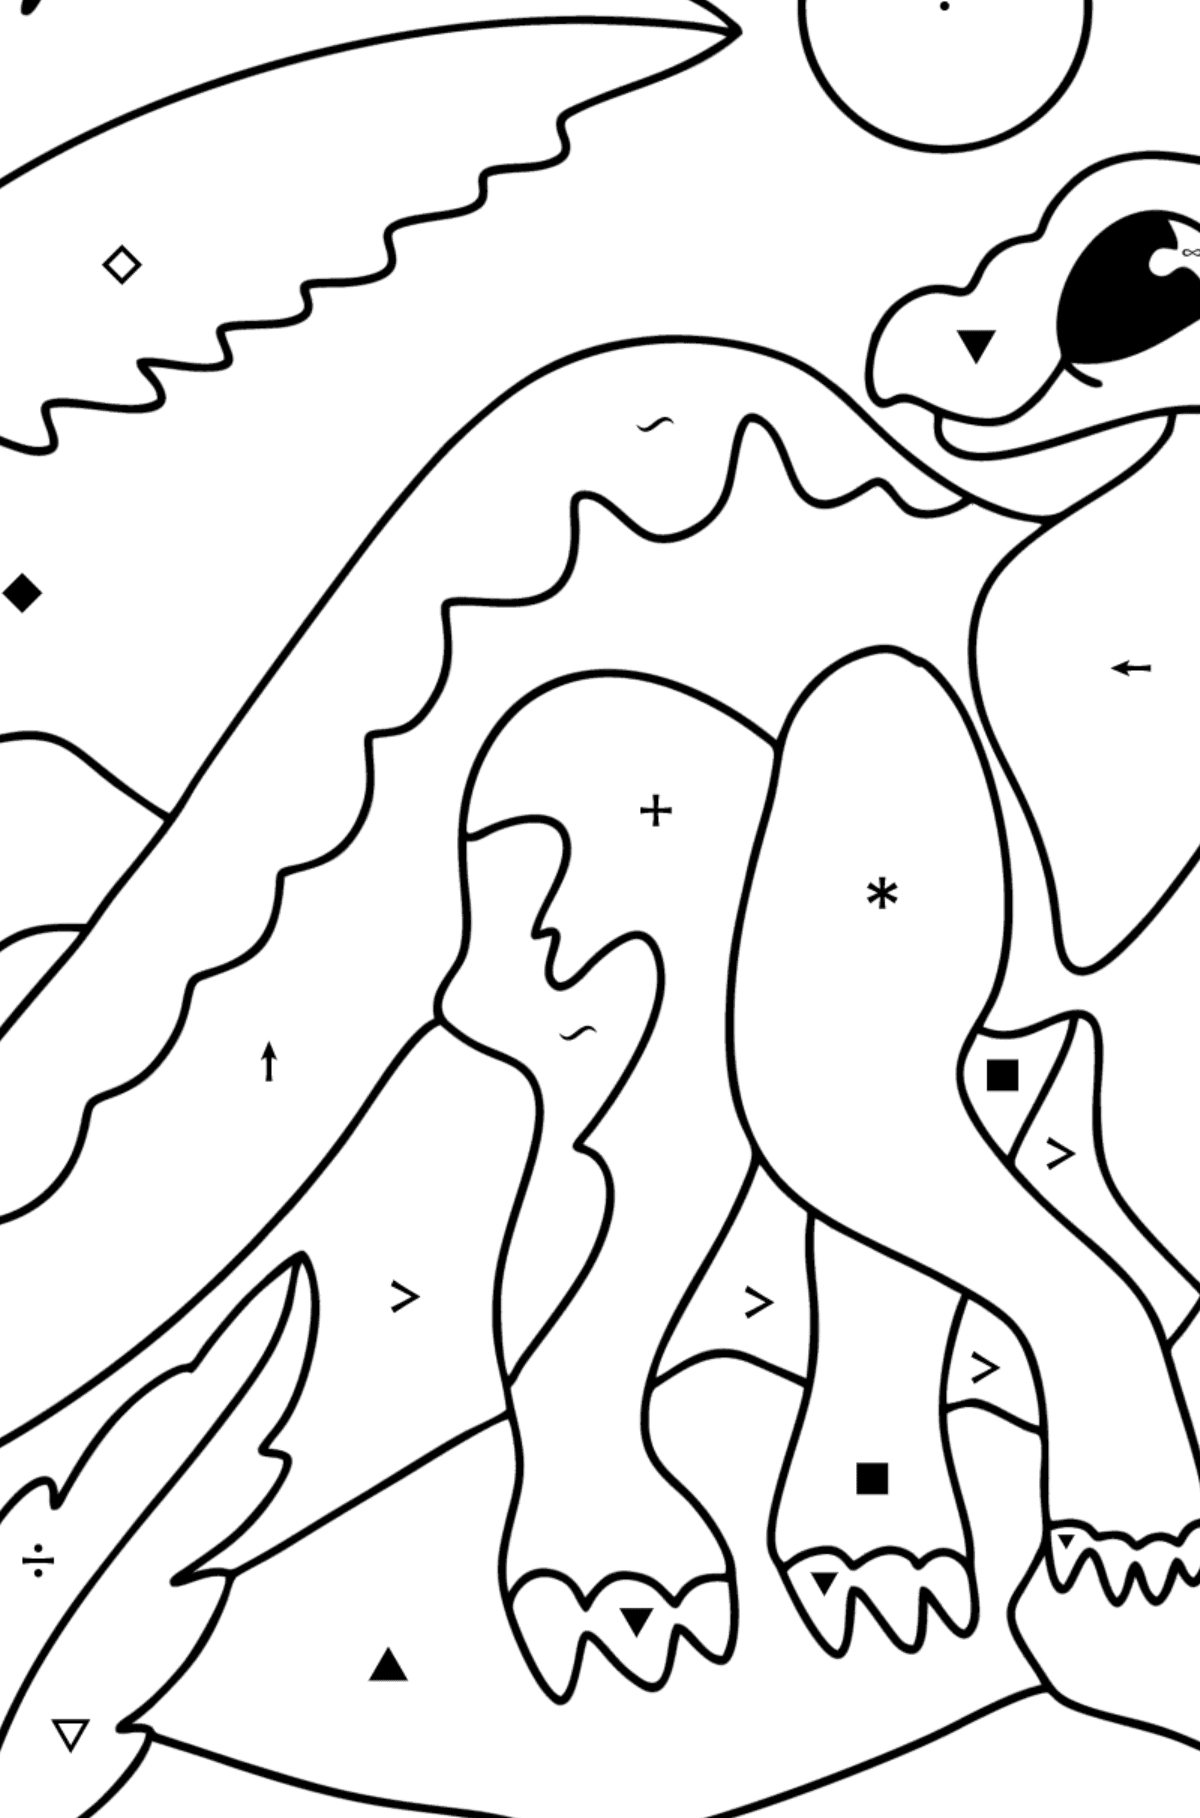 Iguanodon coloring page - Coloring by Symbols for Kids